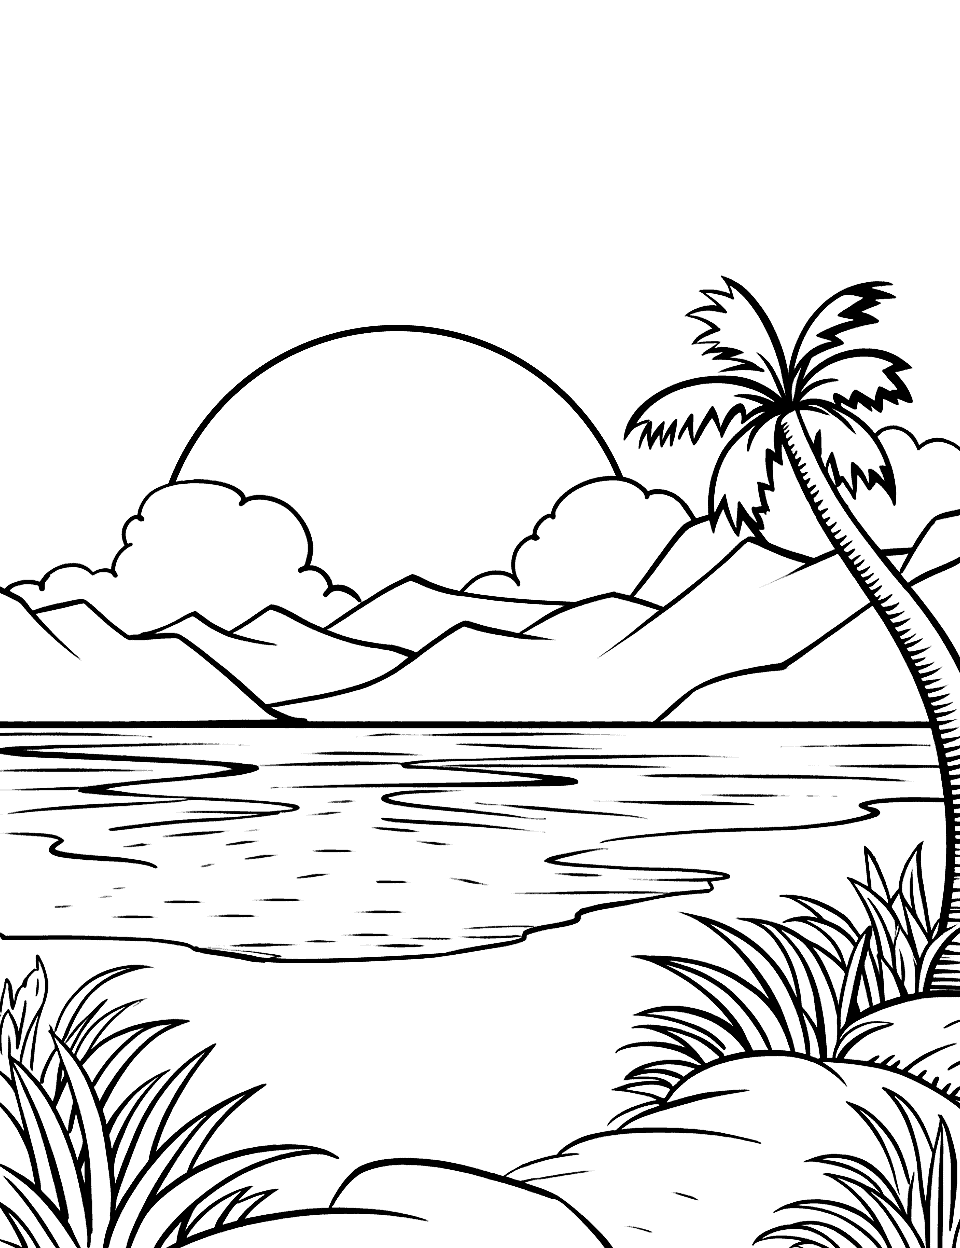 Sunset at the Island Shore Coloring Page - A breathtaking sunset view at a secluded island beach with palm trees.